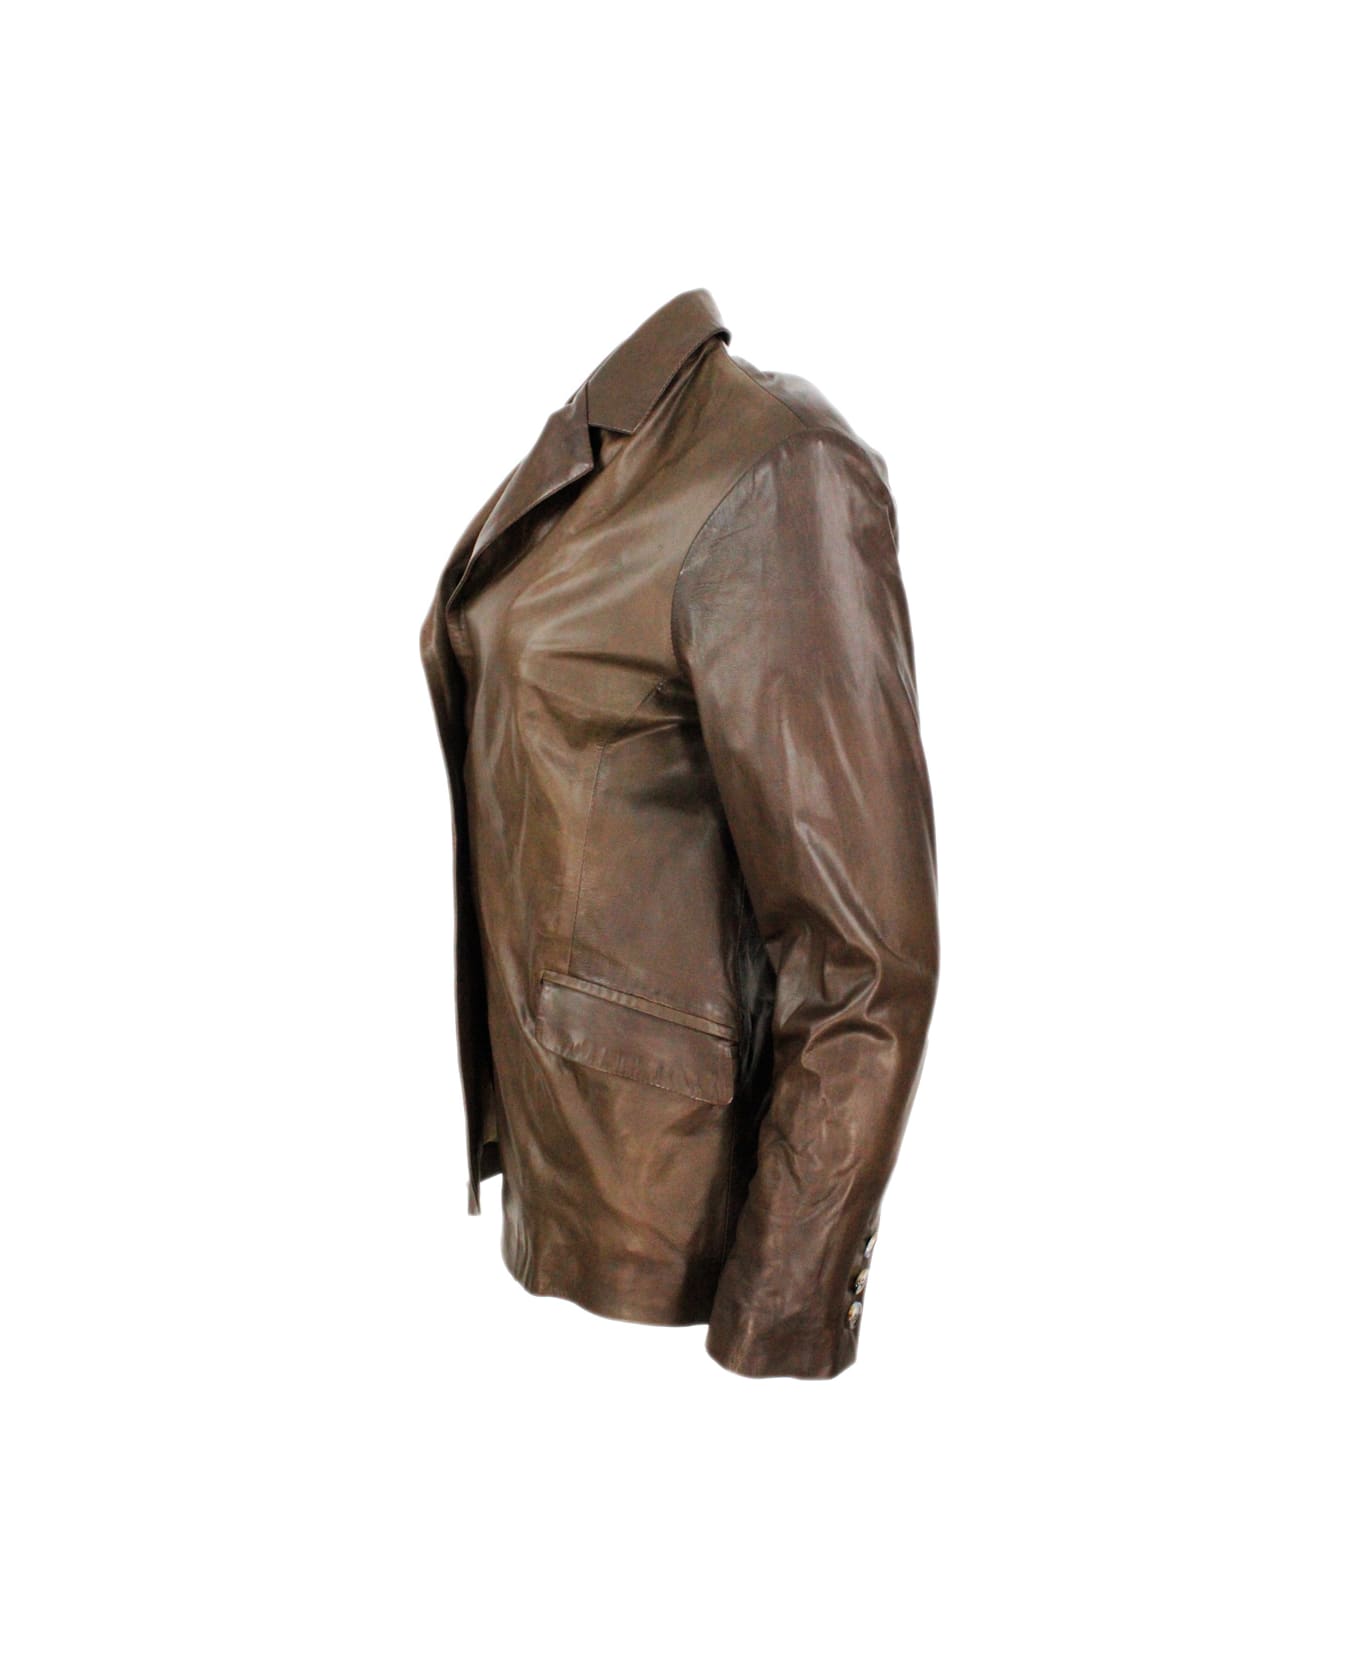 Barba Napoli Soft Leather Blazer Jacket With 2 Button Closure And Flap Pockets - Brown ジャケット